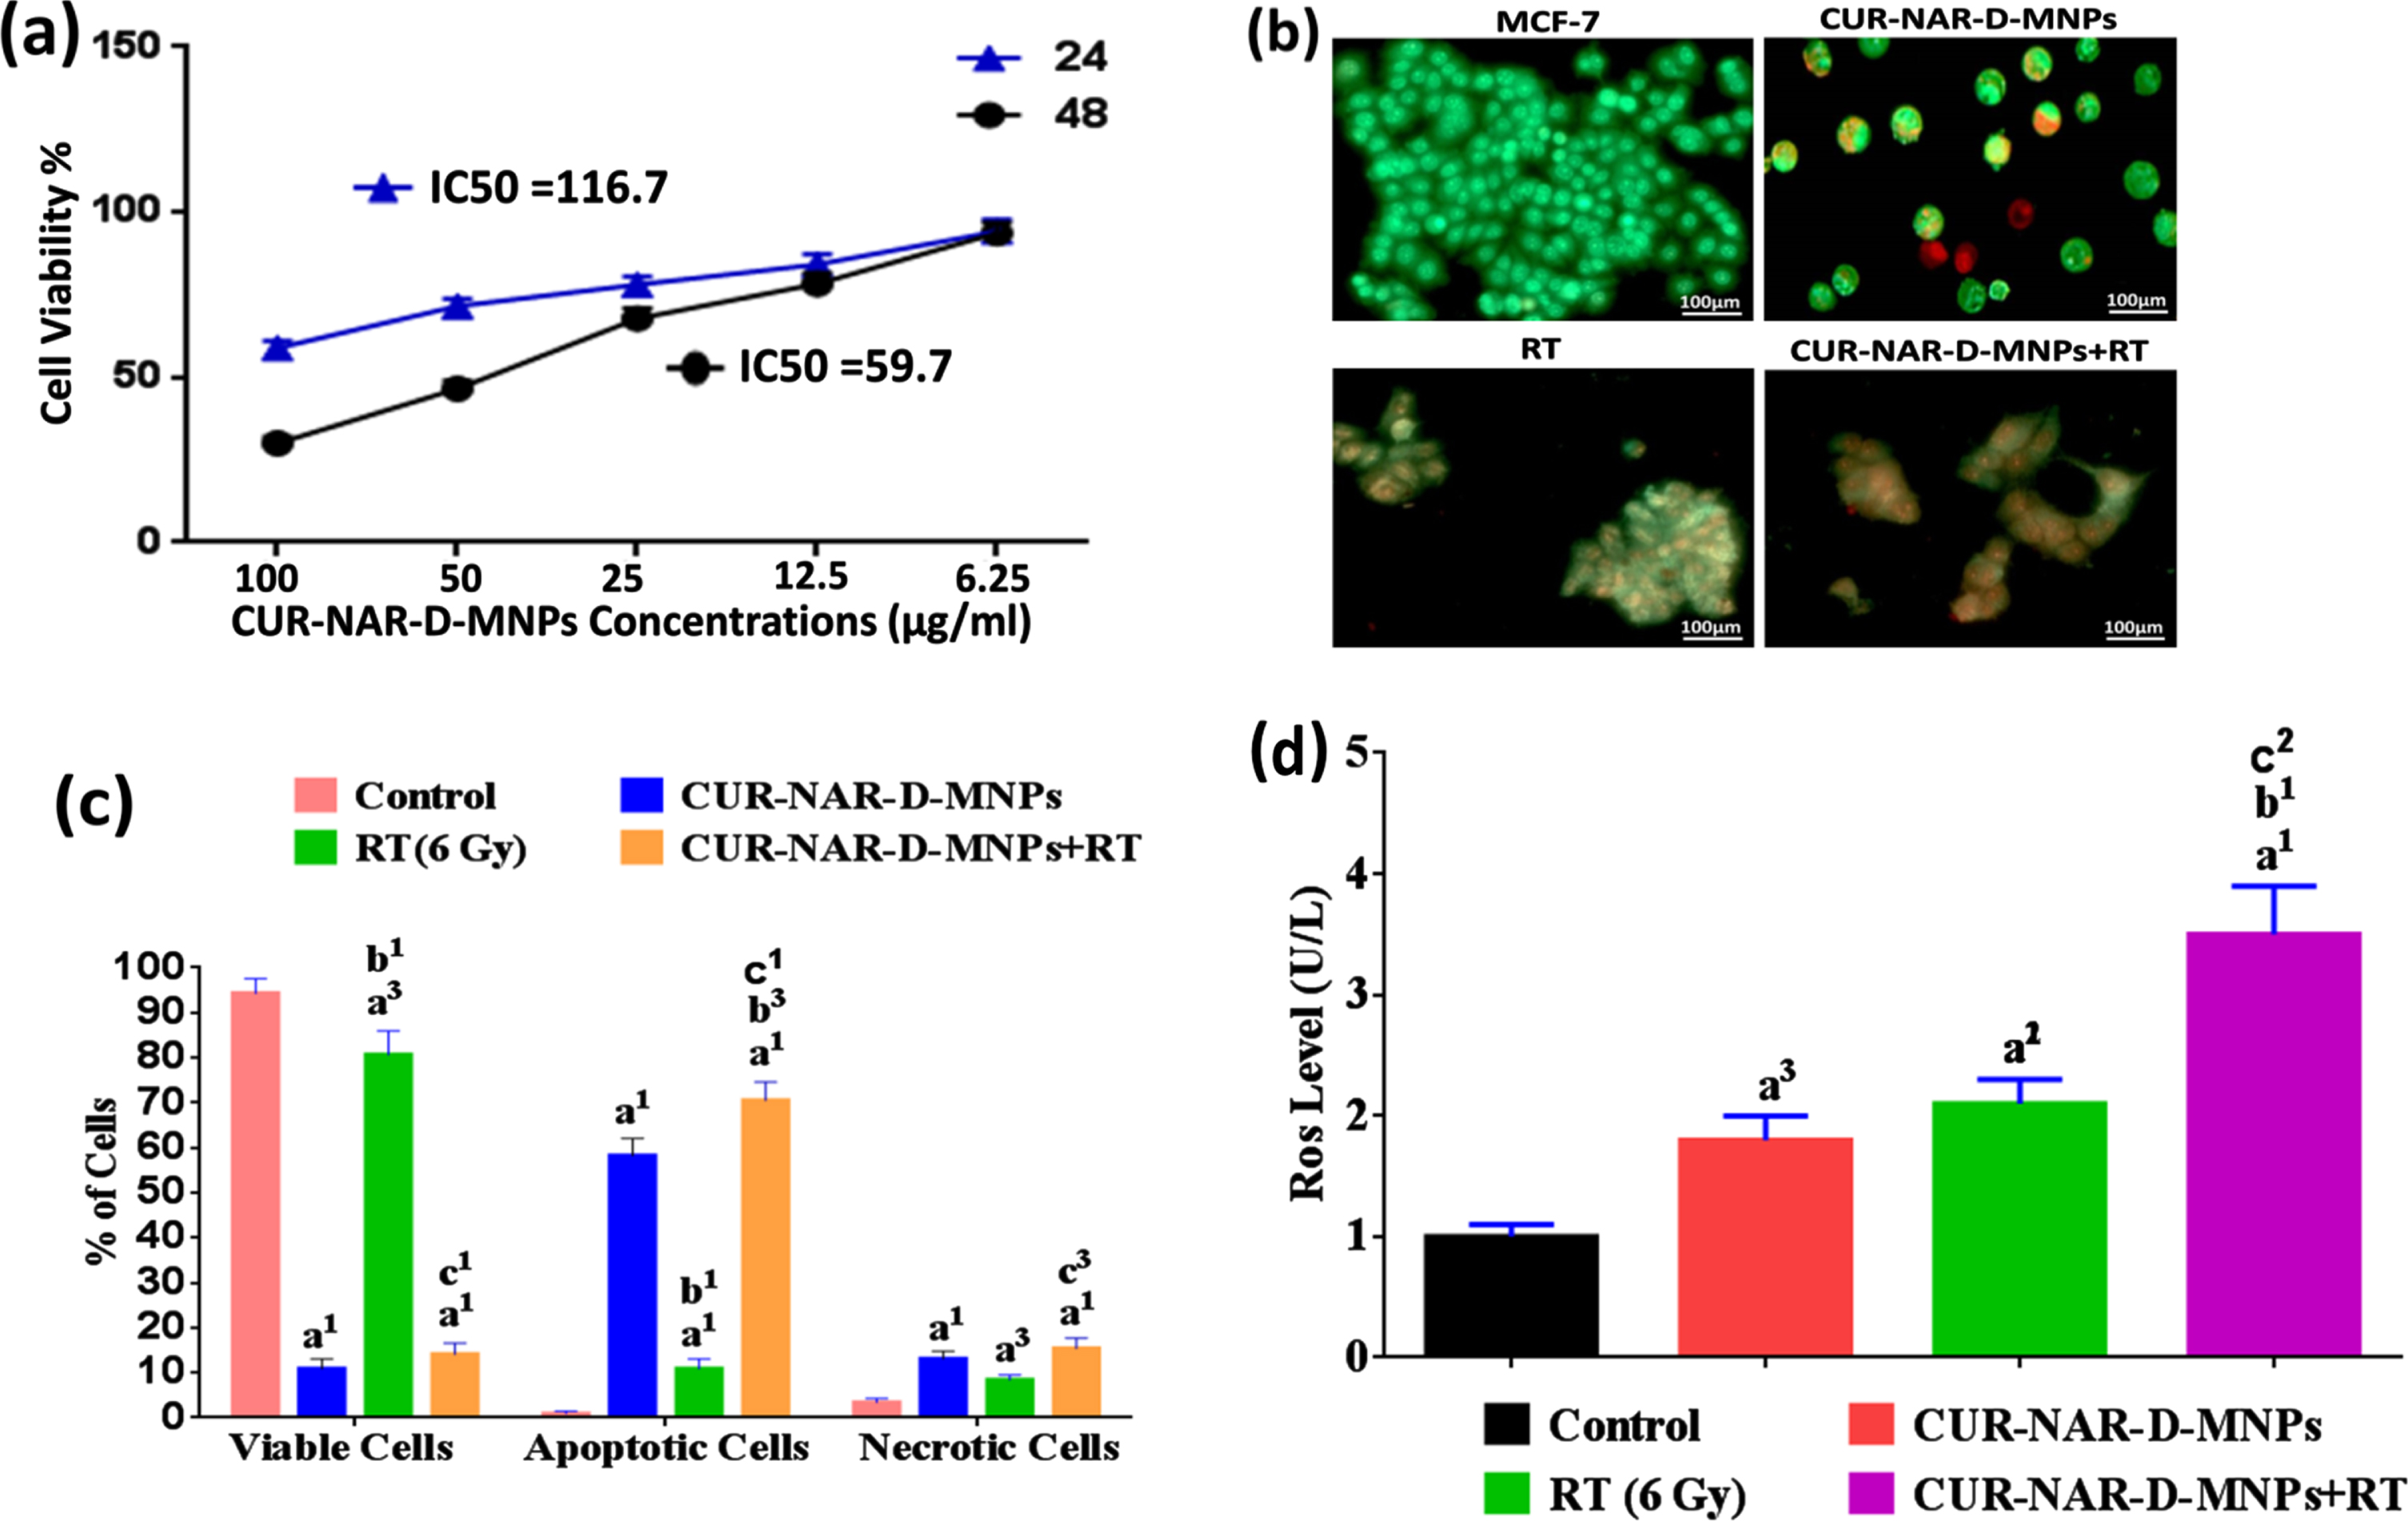 (a) Dose dependent cytotoxicity and IC50 values of CUR-NAR-D-MNPs on MCF-7 cell lines at 24 h and 48 h treatment. (b) Fluorescence microscopic images for viable cells, apoptotic cells and necrotic cells of different groups at 48 hr. (c) bar chart of %of viable, apoptotic, necrotic cells at 48 h, (d) bar chart of ROS level. Values expressed as the mean±SEM, n = 5. a1p < 0.001, a3p < 0.05 vs. control; b1p < 0.001, b3p < 0.05 vs. CUR-NAR-D-MNPs group; c1p < 0.001, c3p < 0.05 vs. RT group.